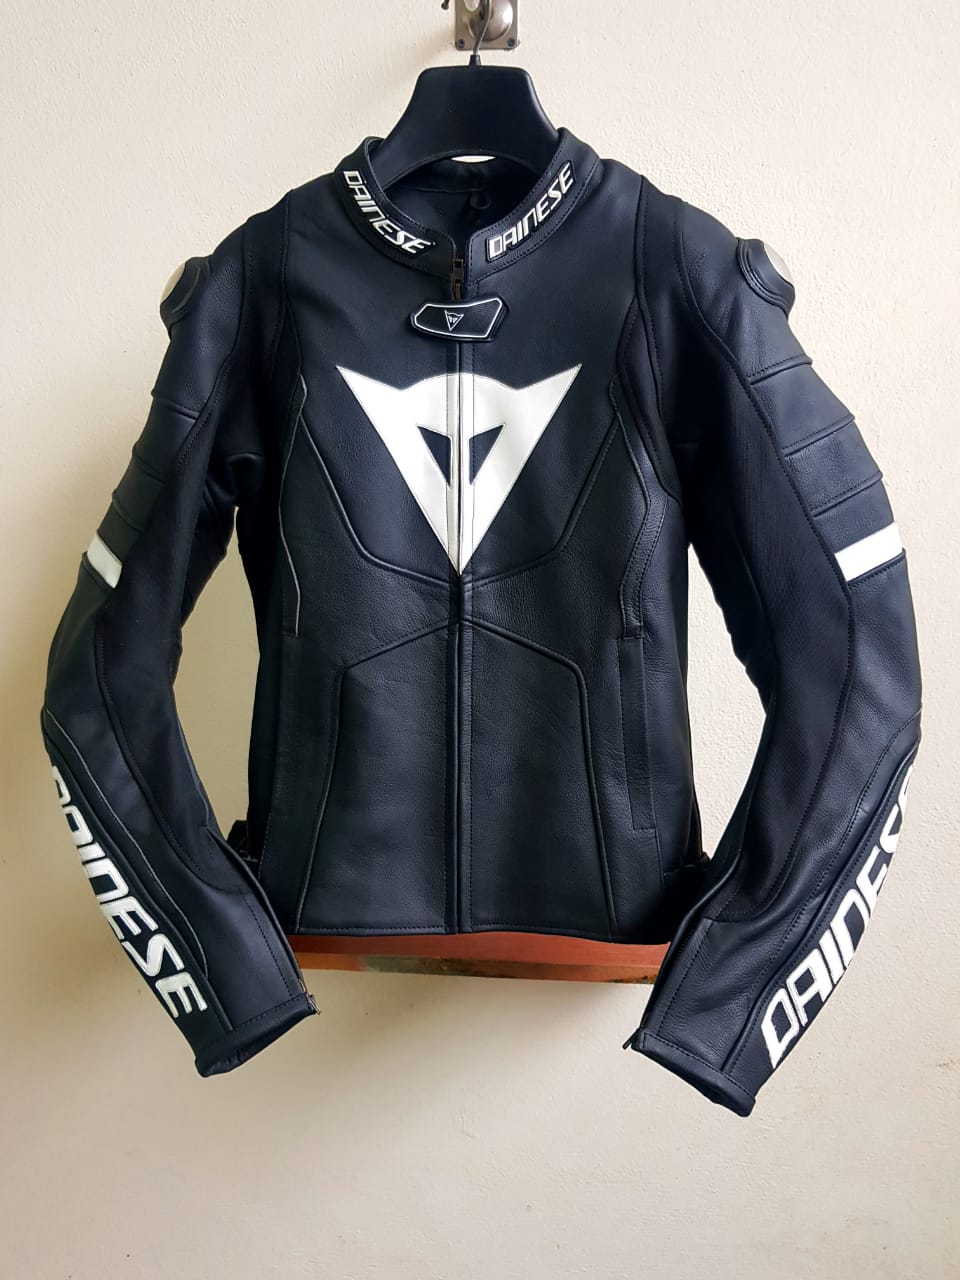 Custom jacket Black White Avro 4 CE Protected Motorcycle Cowhide Leather Racing Jacket Front